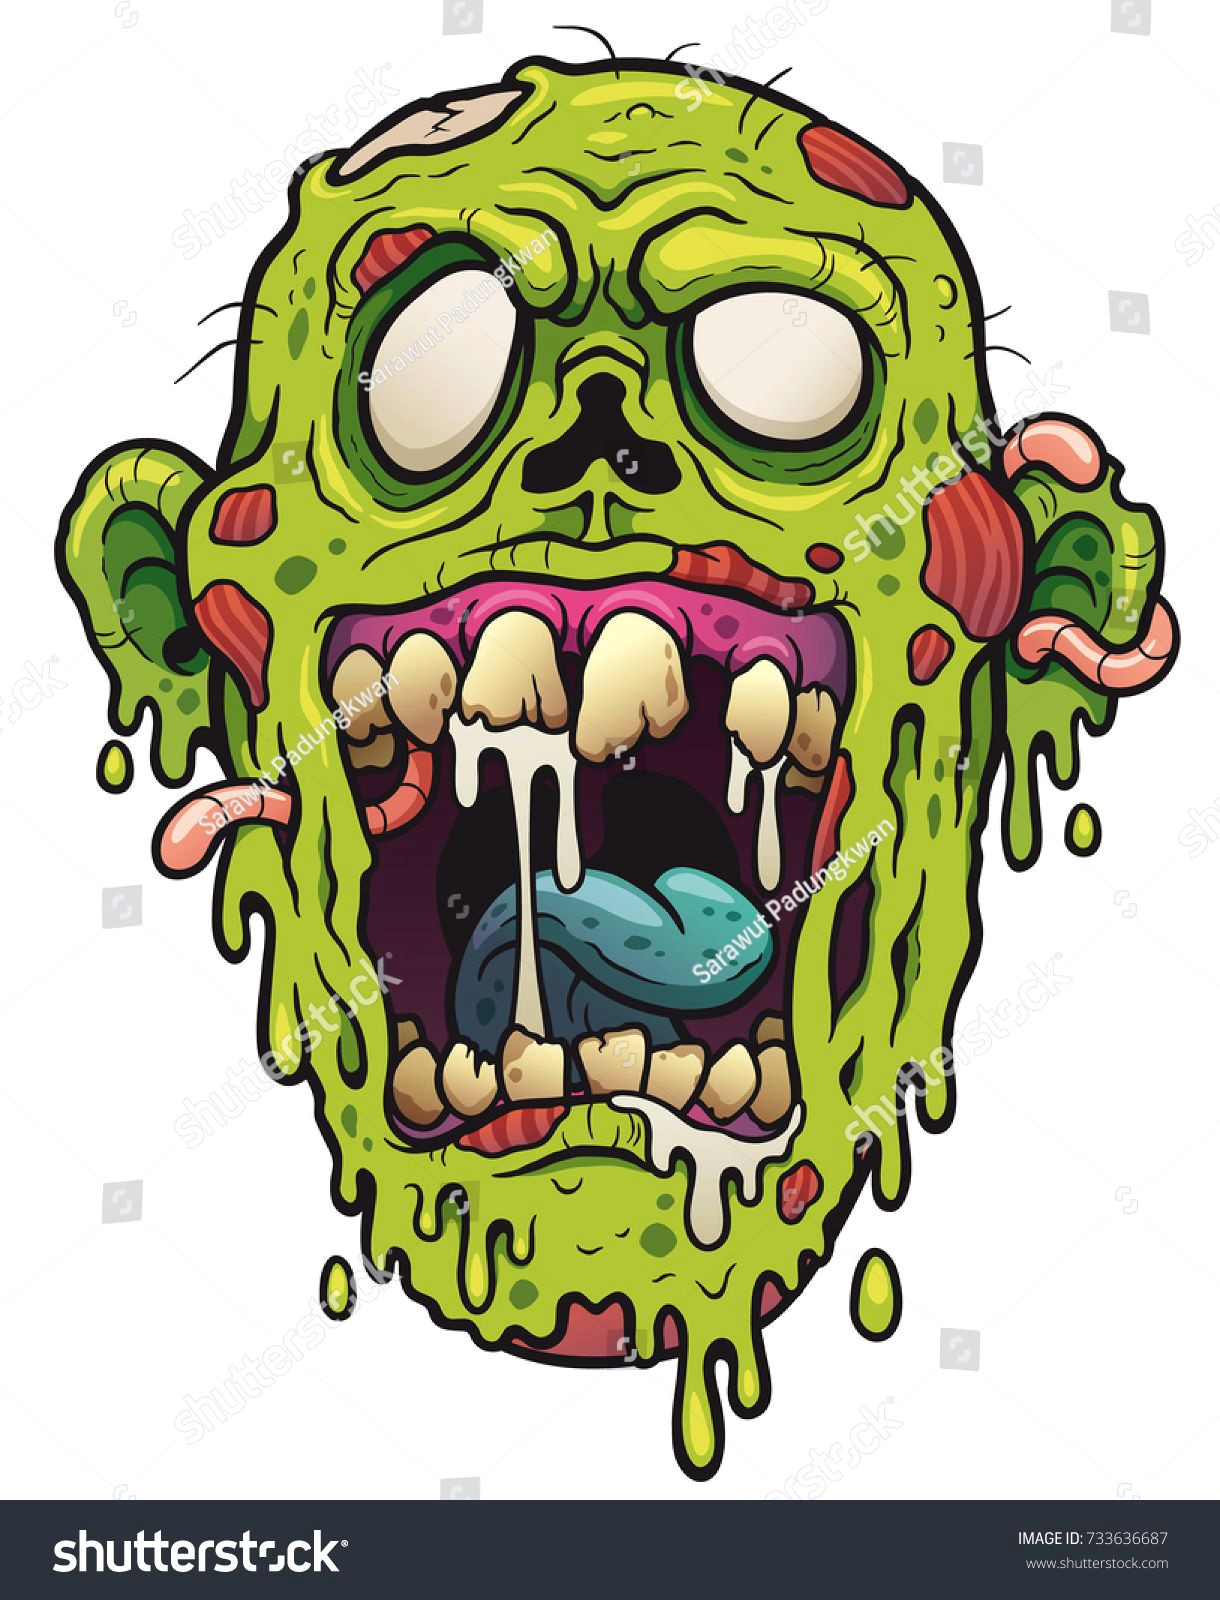 Drawing Zombie Face Vector Illustration Of Cartoon Zombie Head Patrick B In 2019